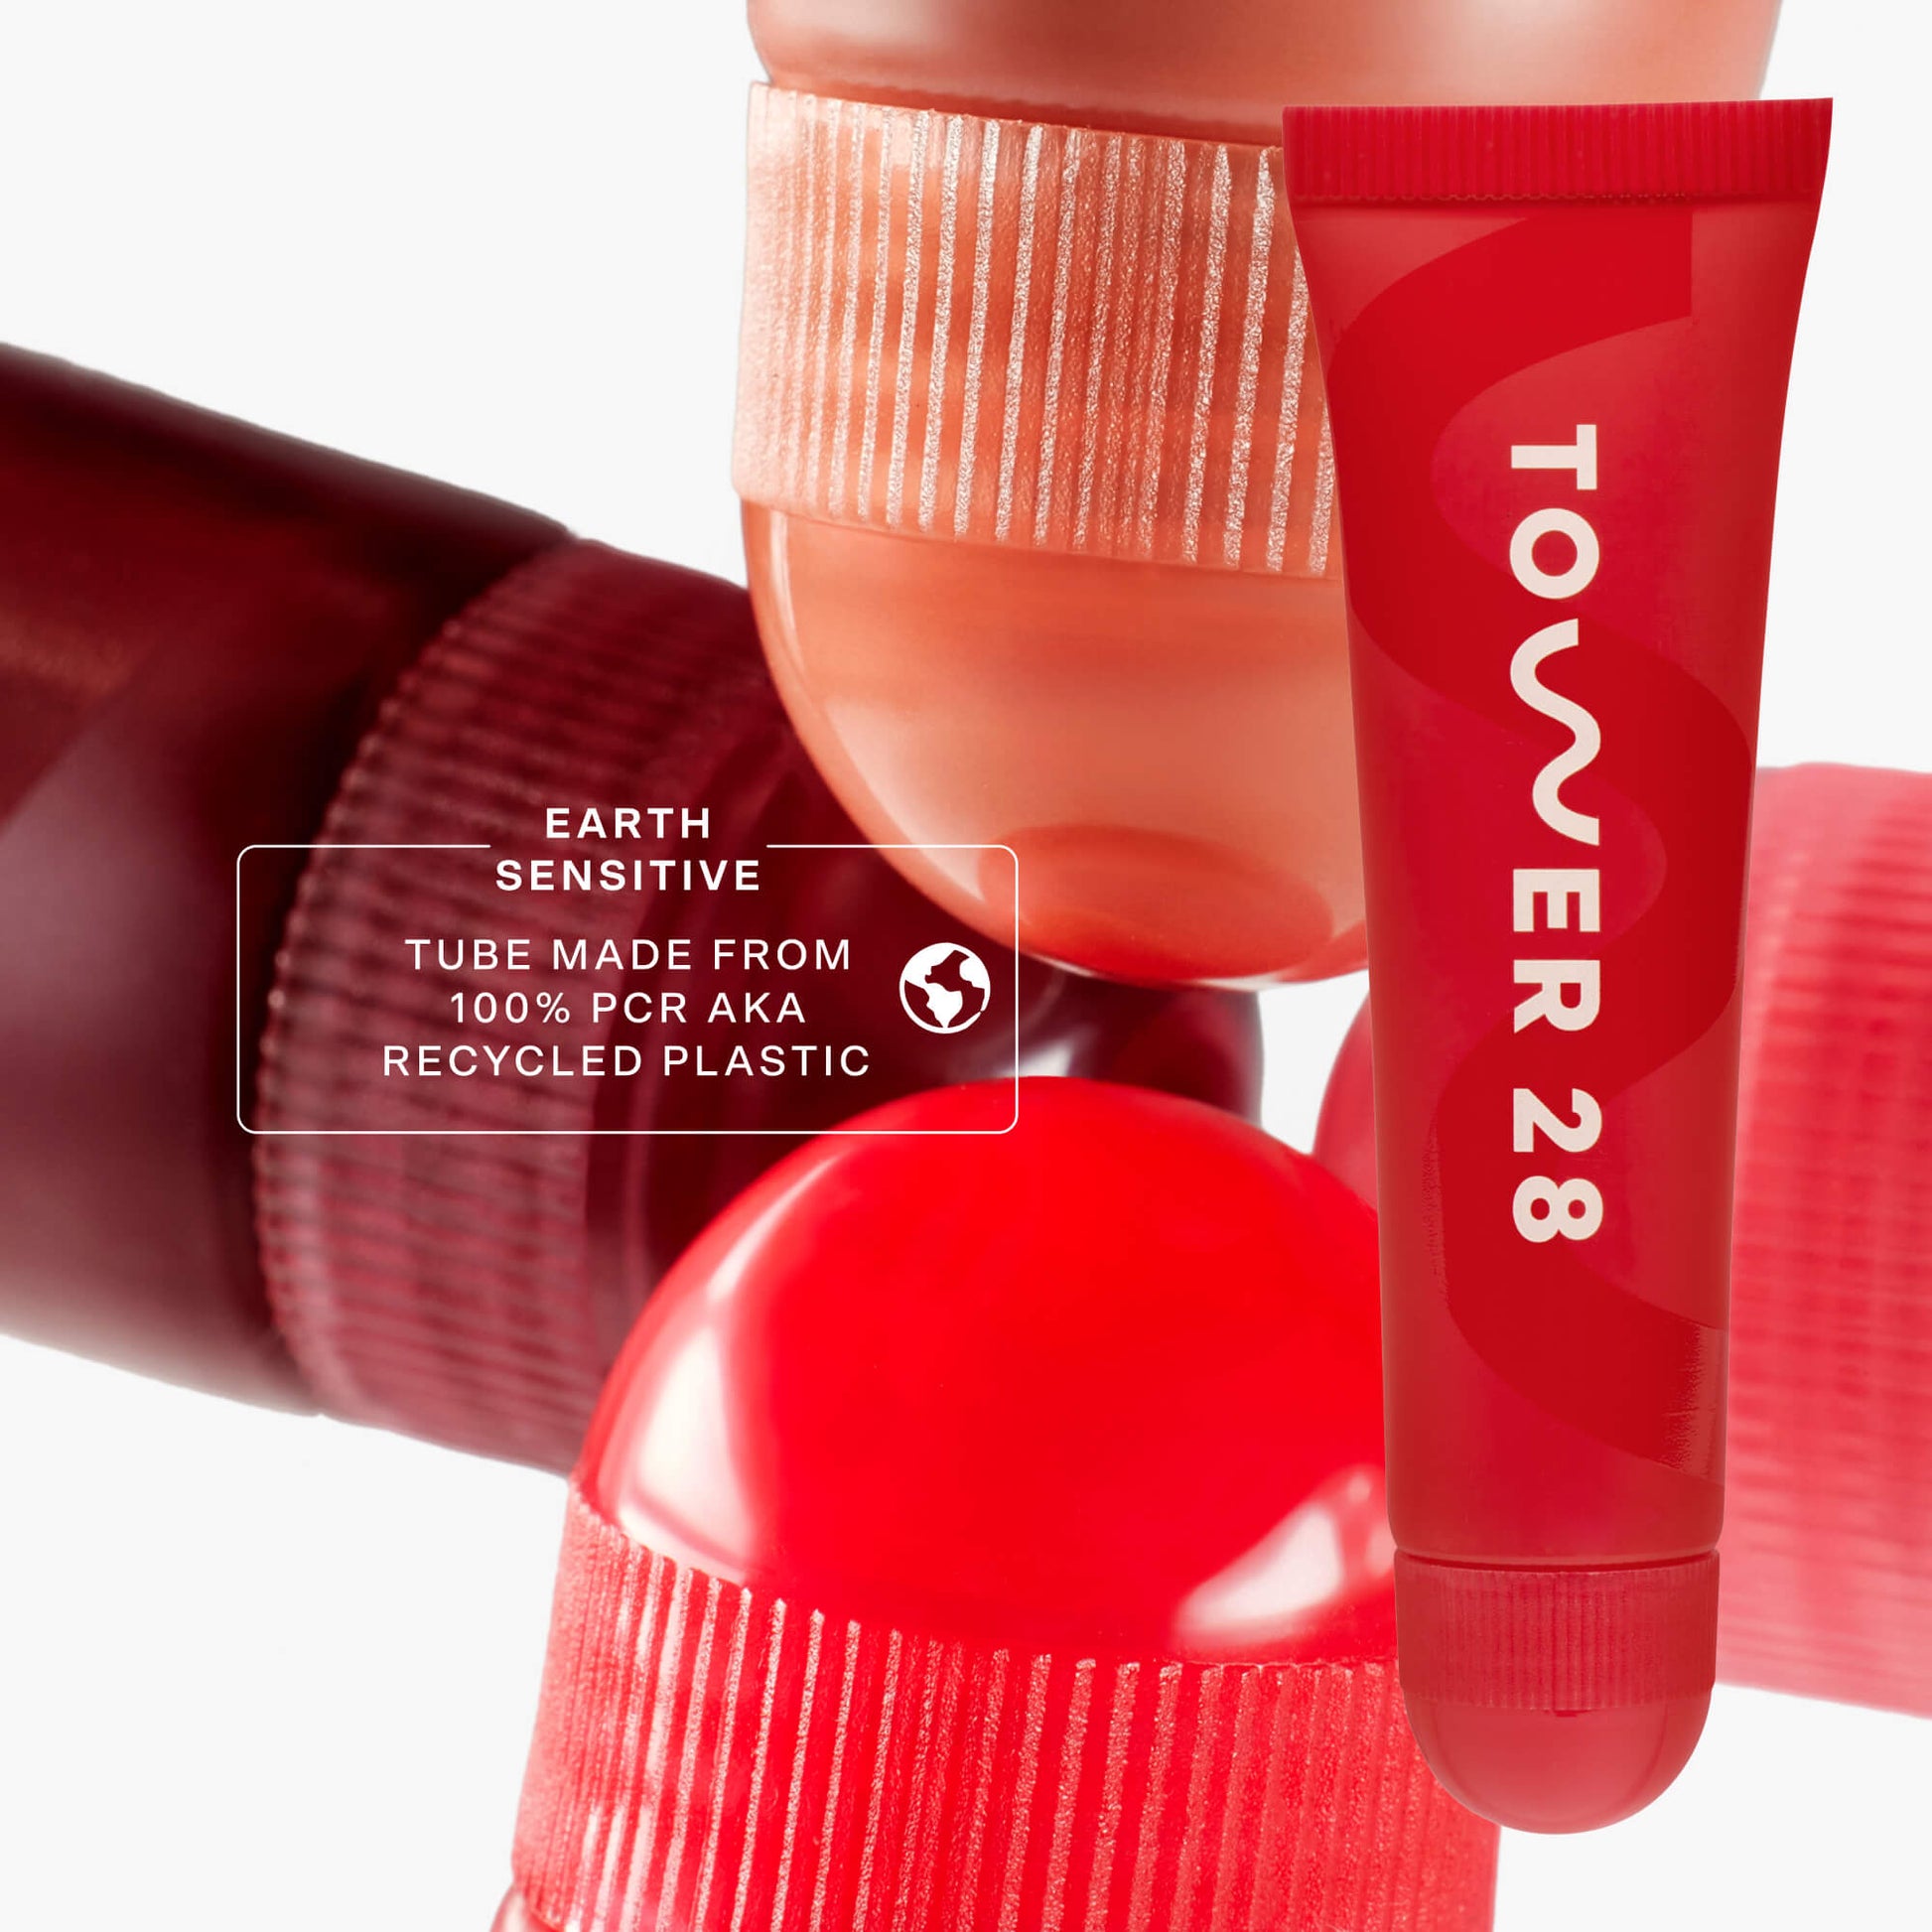 [Tower 28 Beauty LipSoftie™ Lip Treatment in Blood Orange Vanilla has 100% recycled plastic packaging.